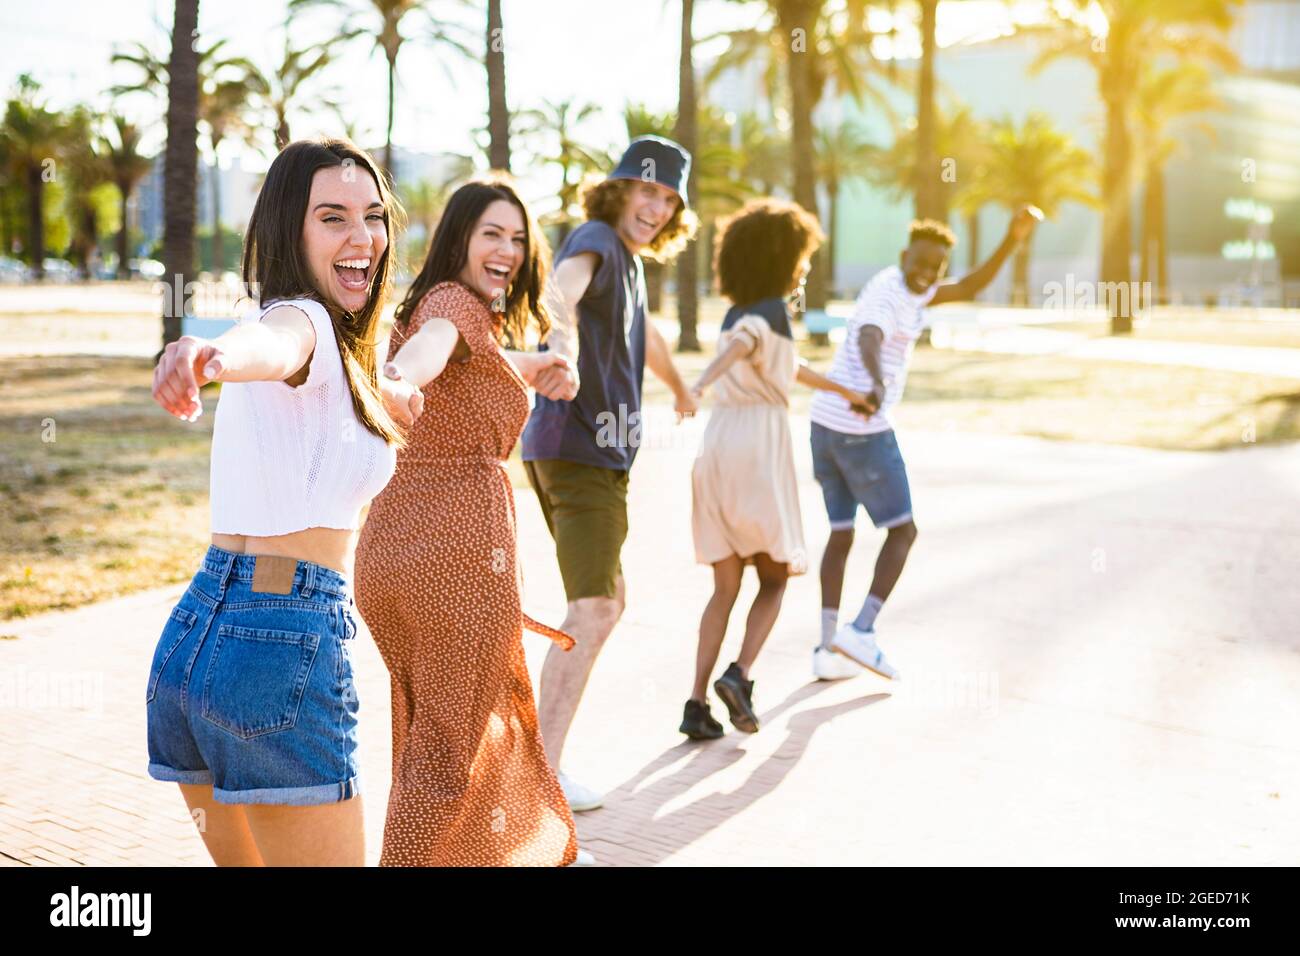 Multiethnic group of young friends running happily together  Stock Photo